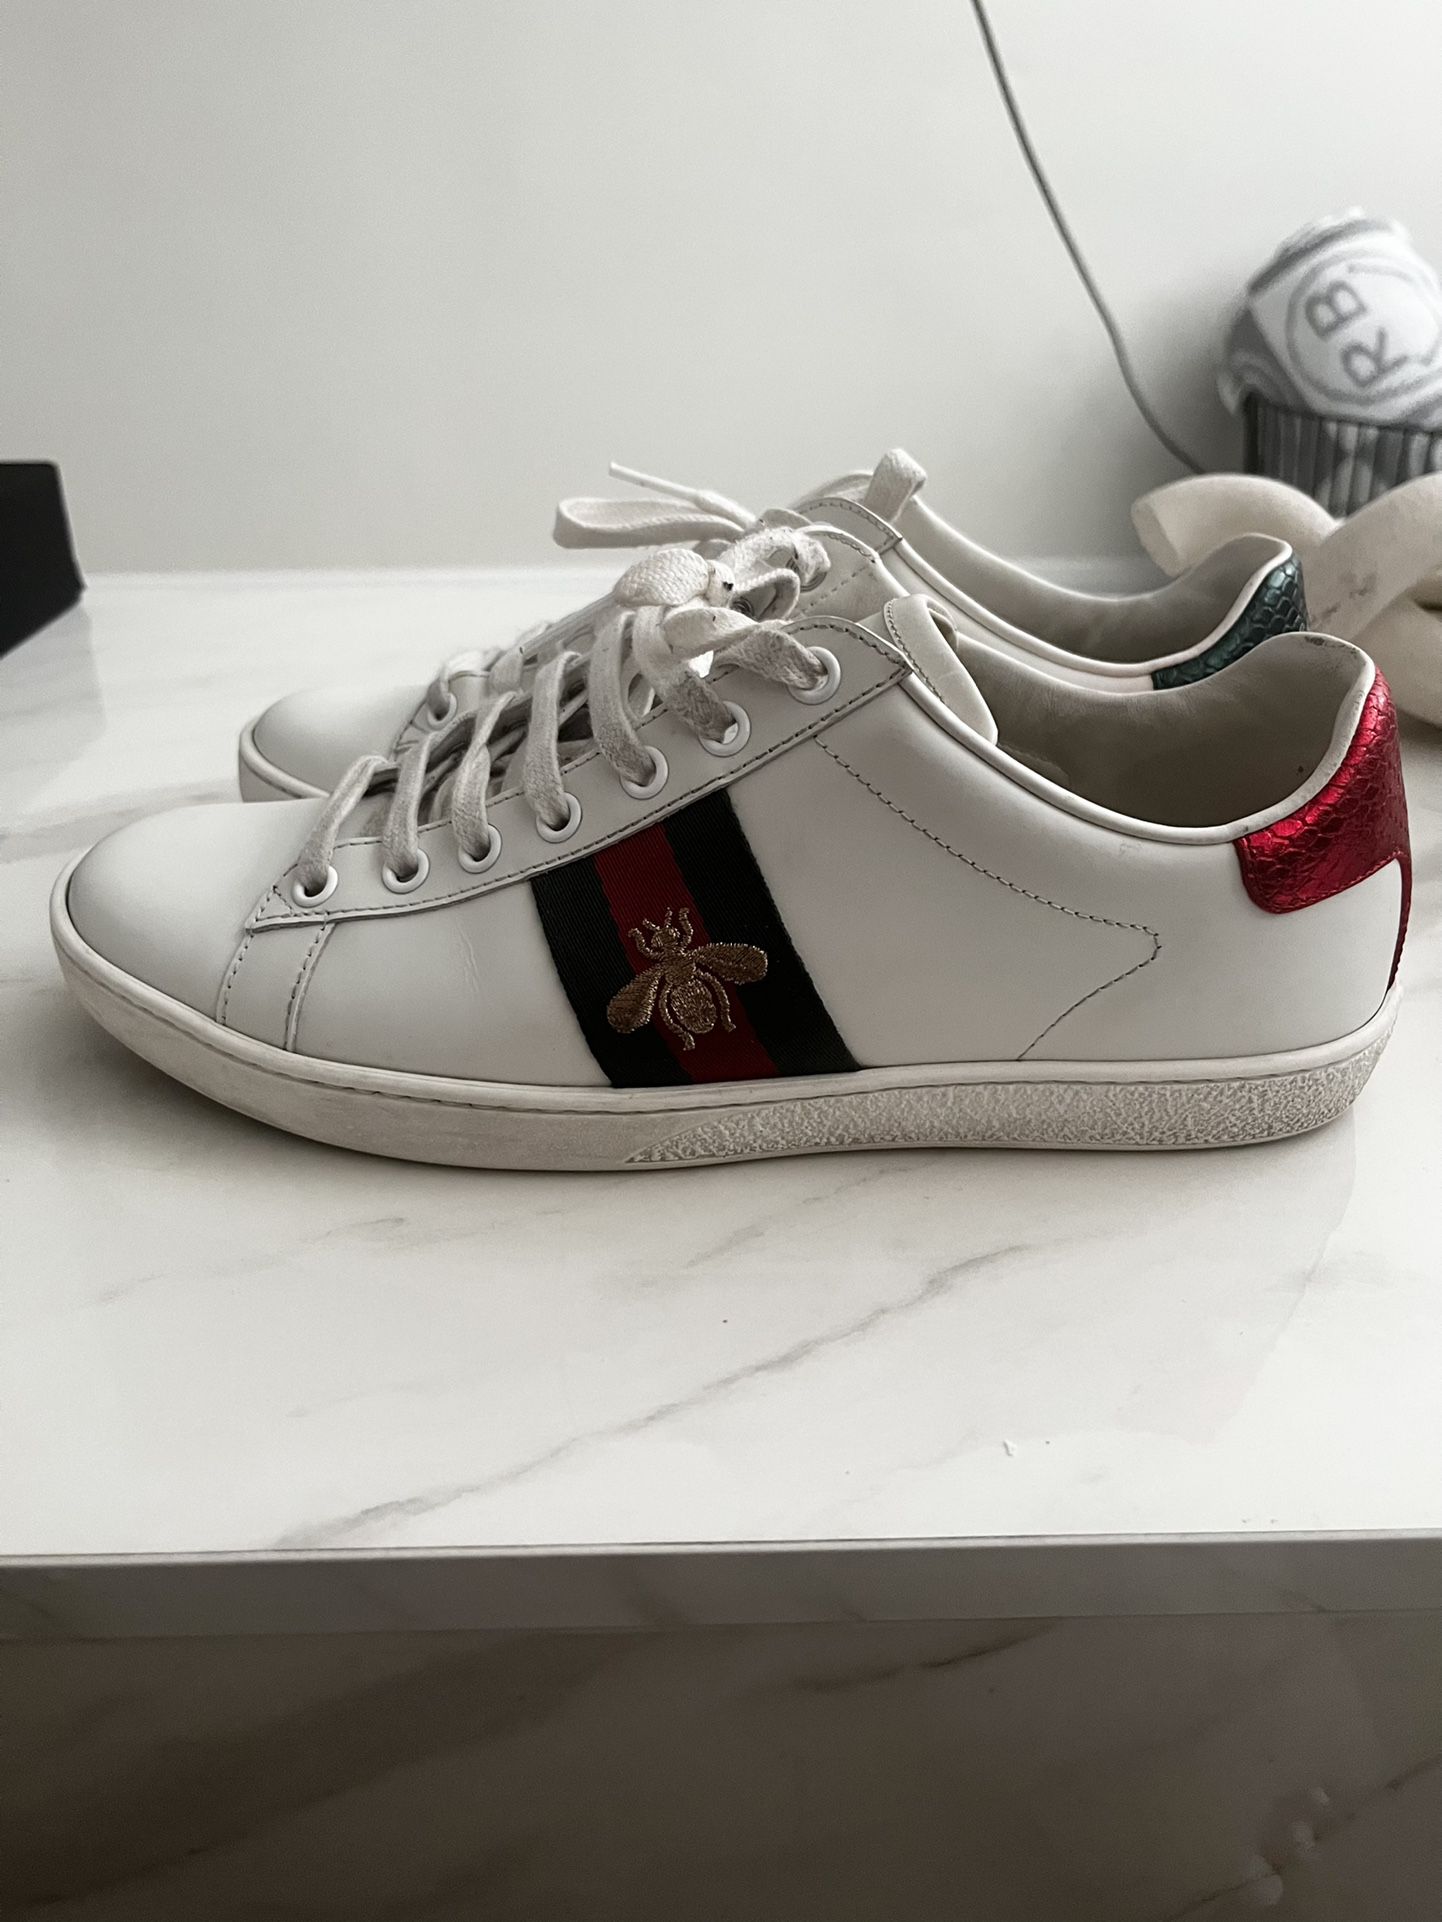 Gucci Women's Ace w/ Water Trim size 38.5 for Sale in Burbank, CA - OfferUp